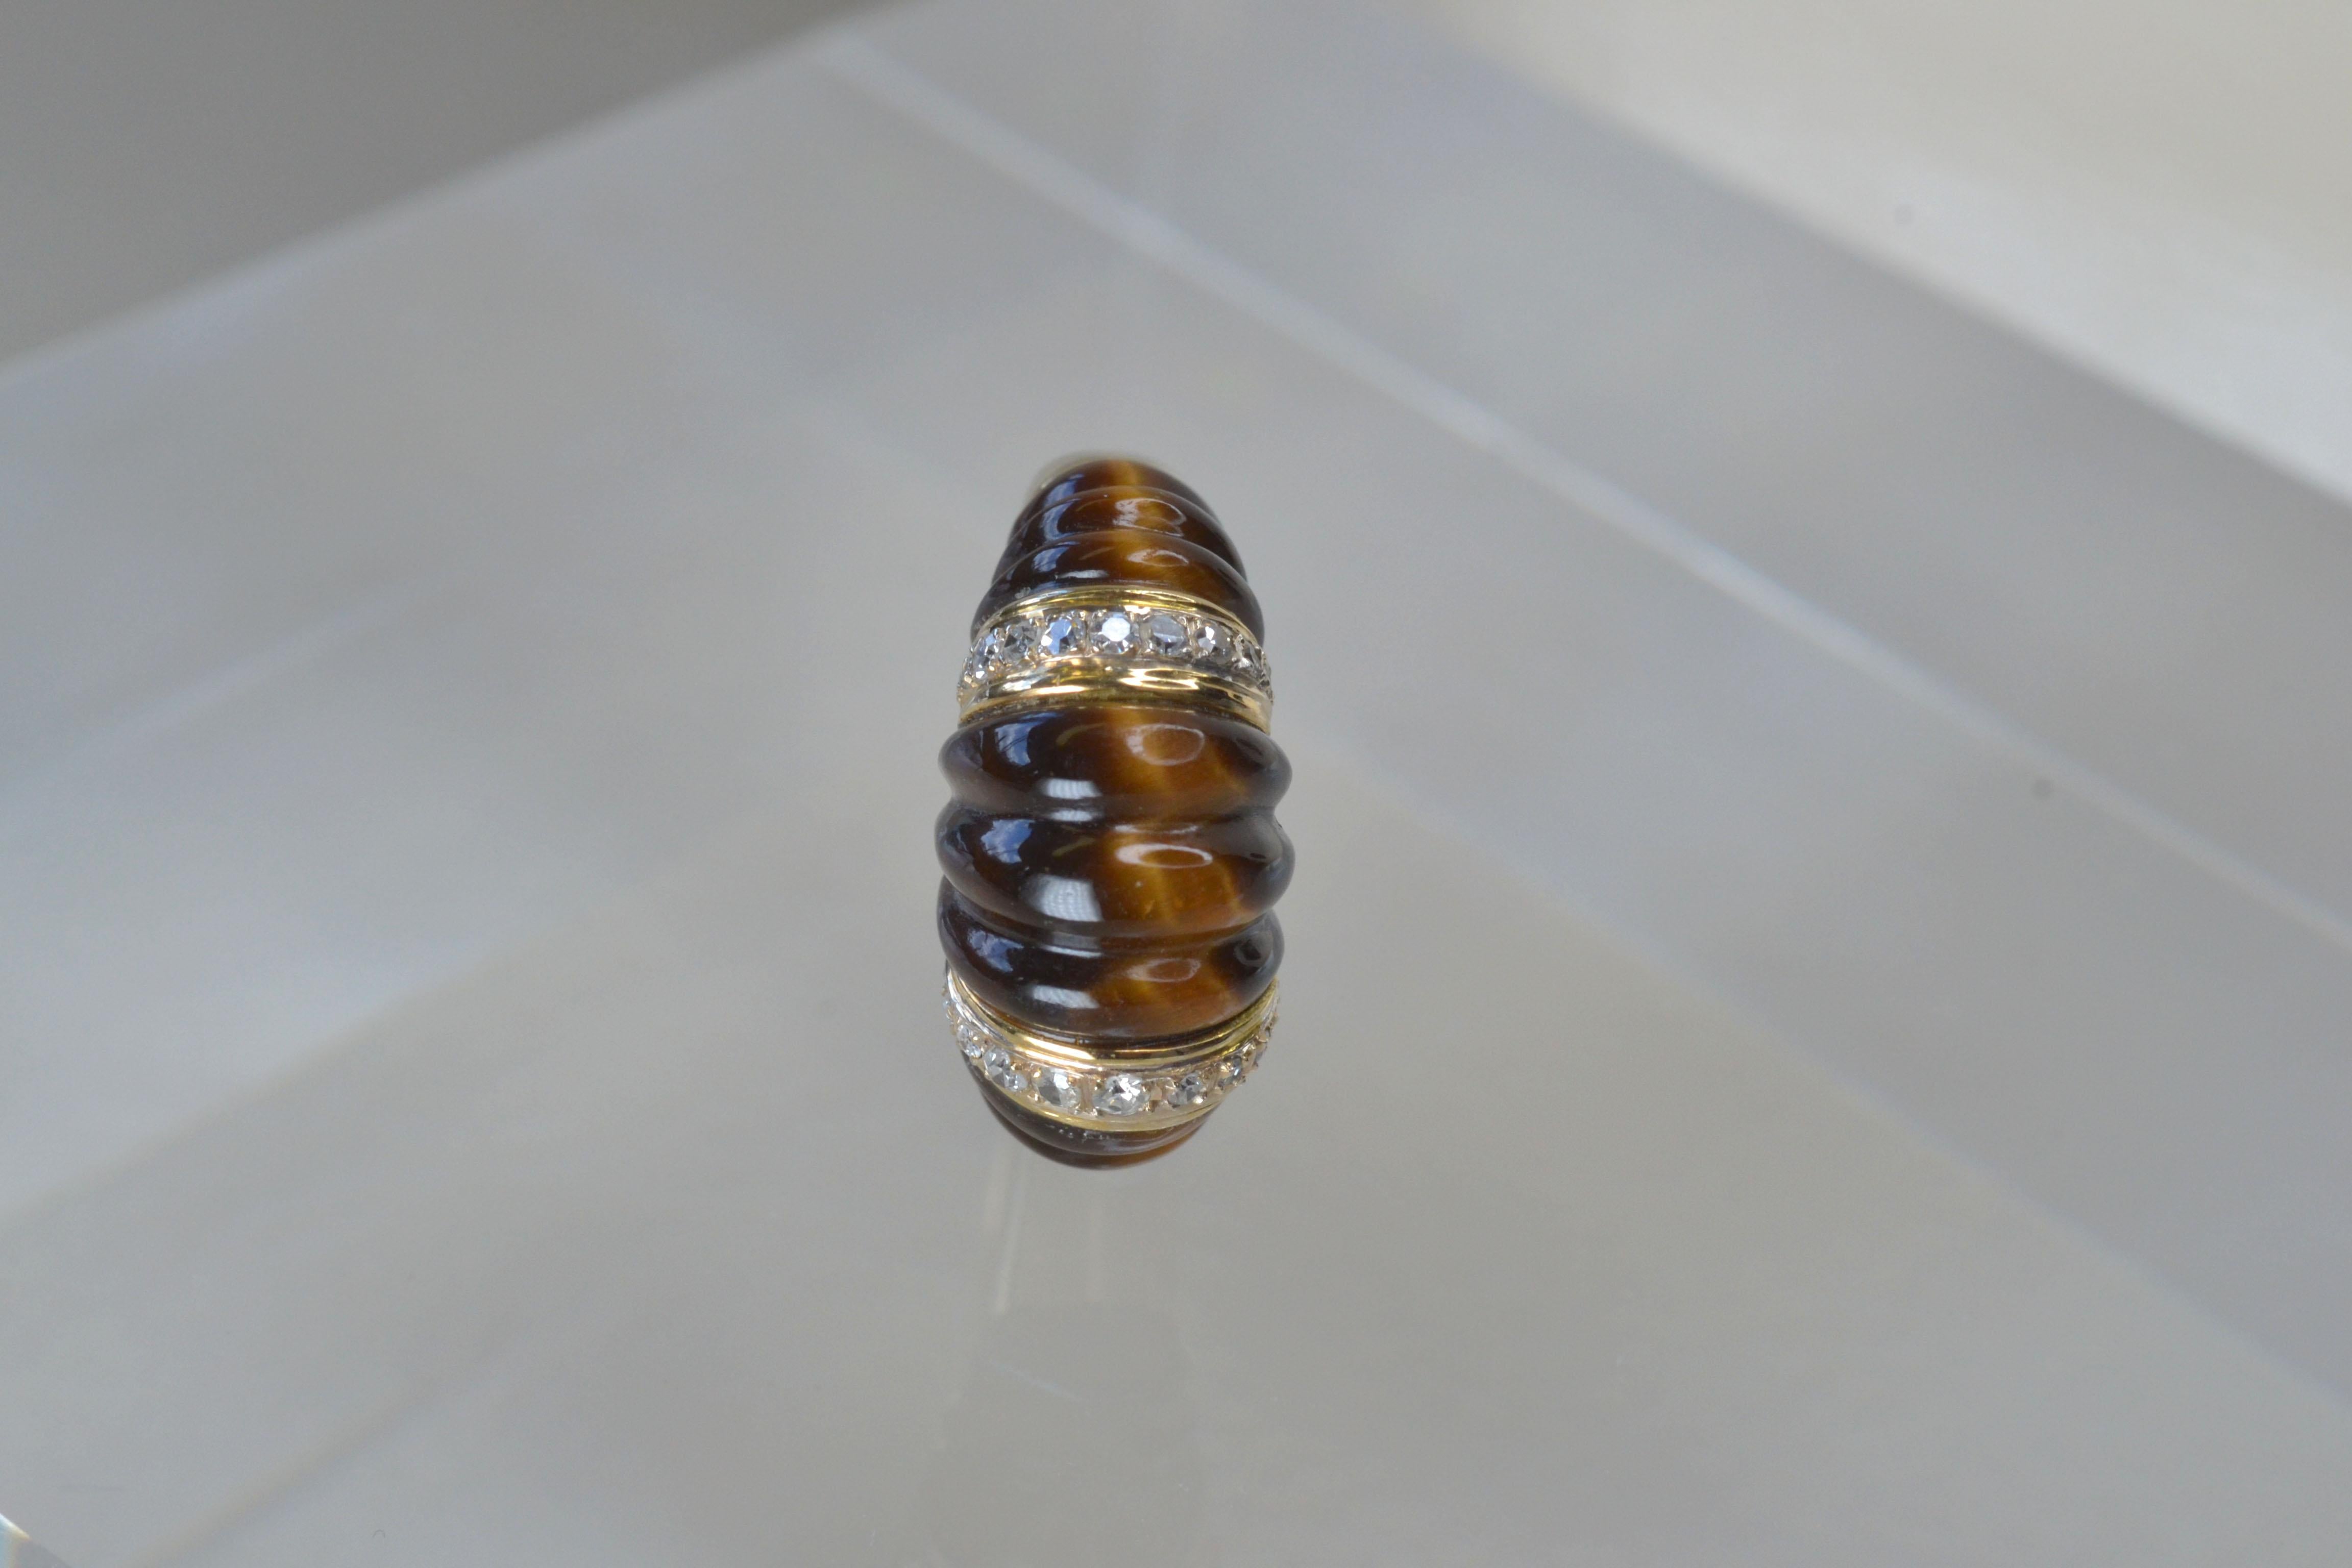 Cabochon Vintage 14k Gold Tiger's Eye and Diamond Scalloped Ring, One-of-a-kind For Sale